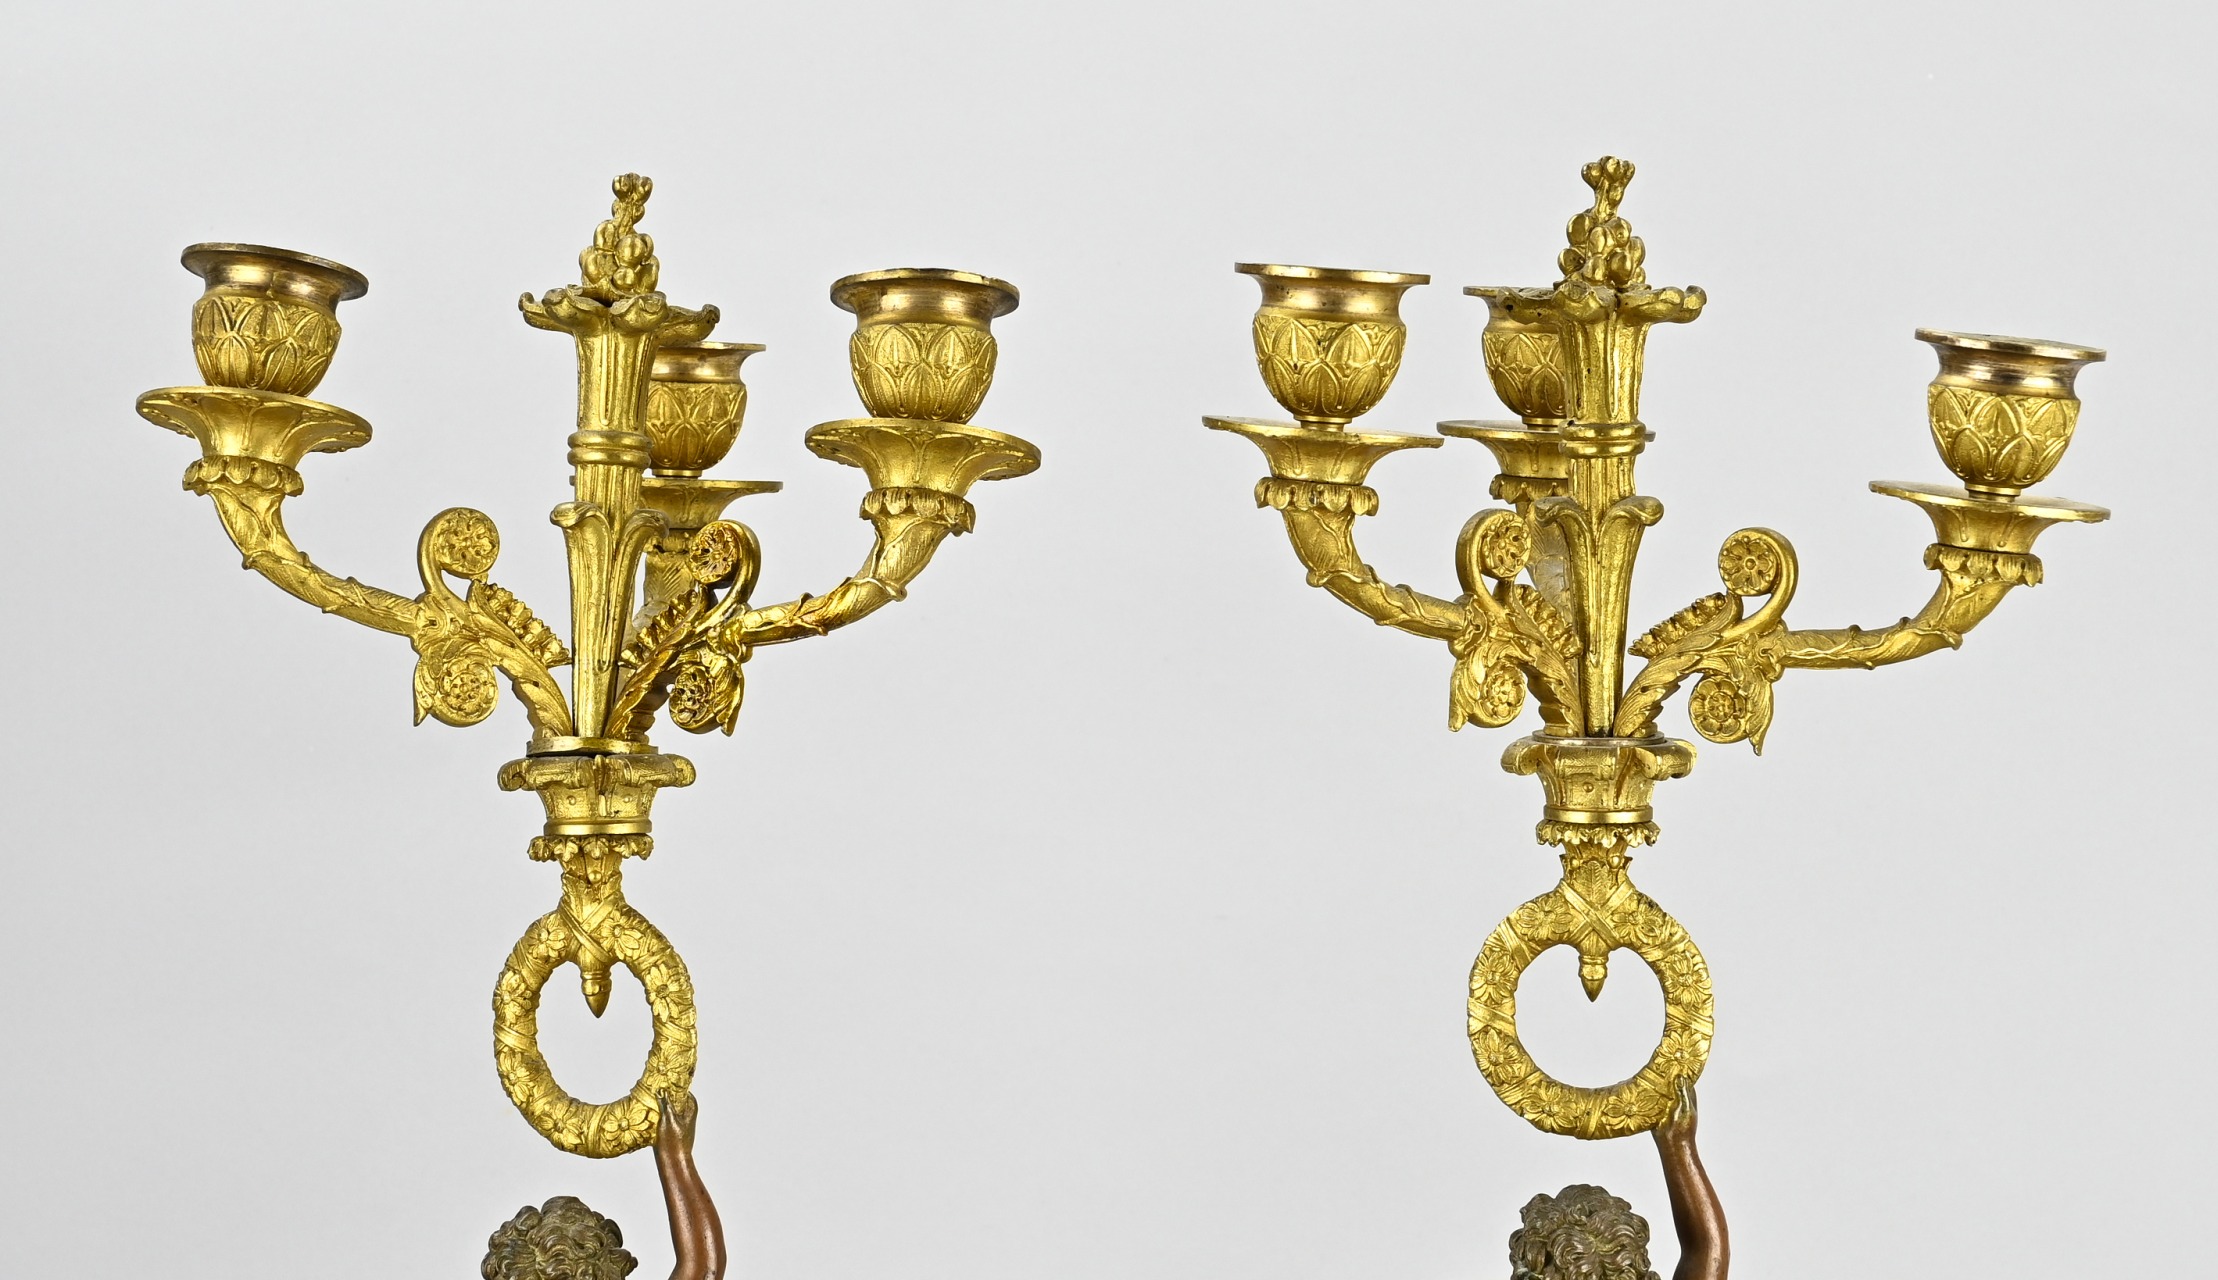 2x Empire candlestick, H 59 cm. - Image 3 of 5